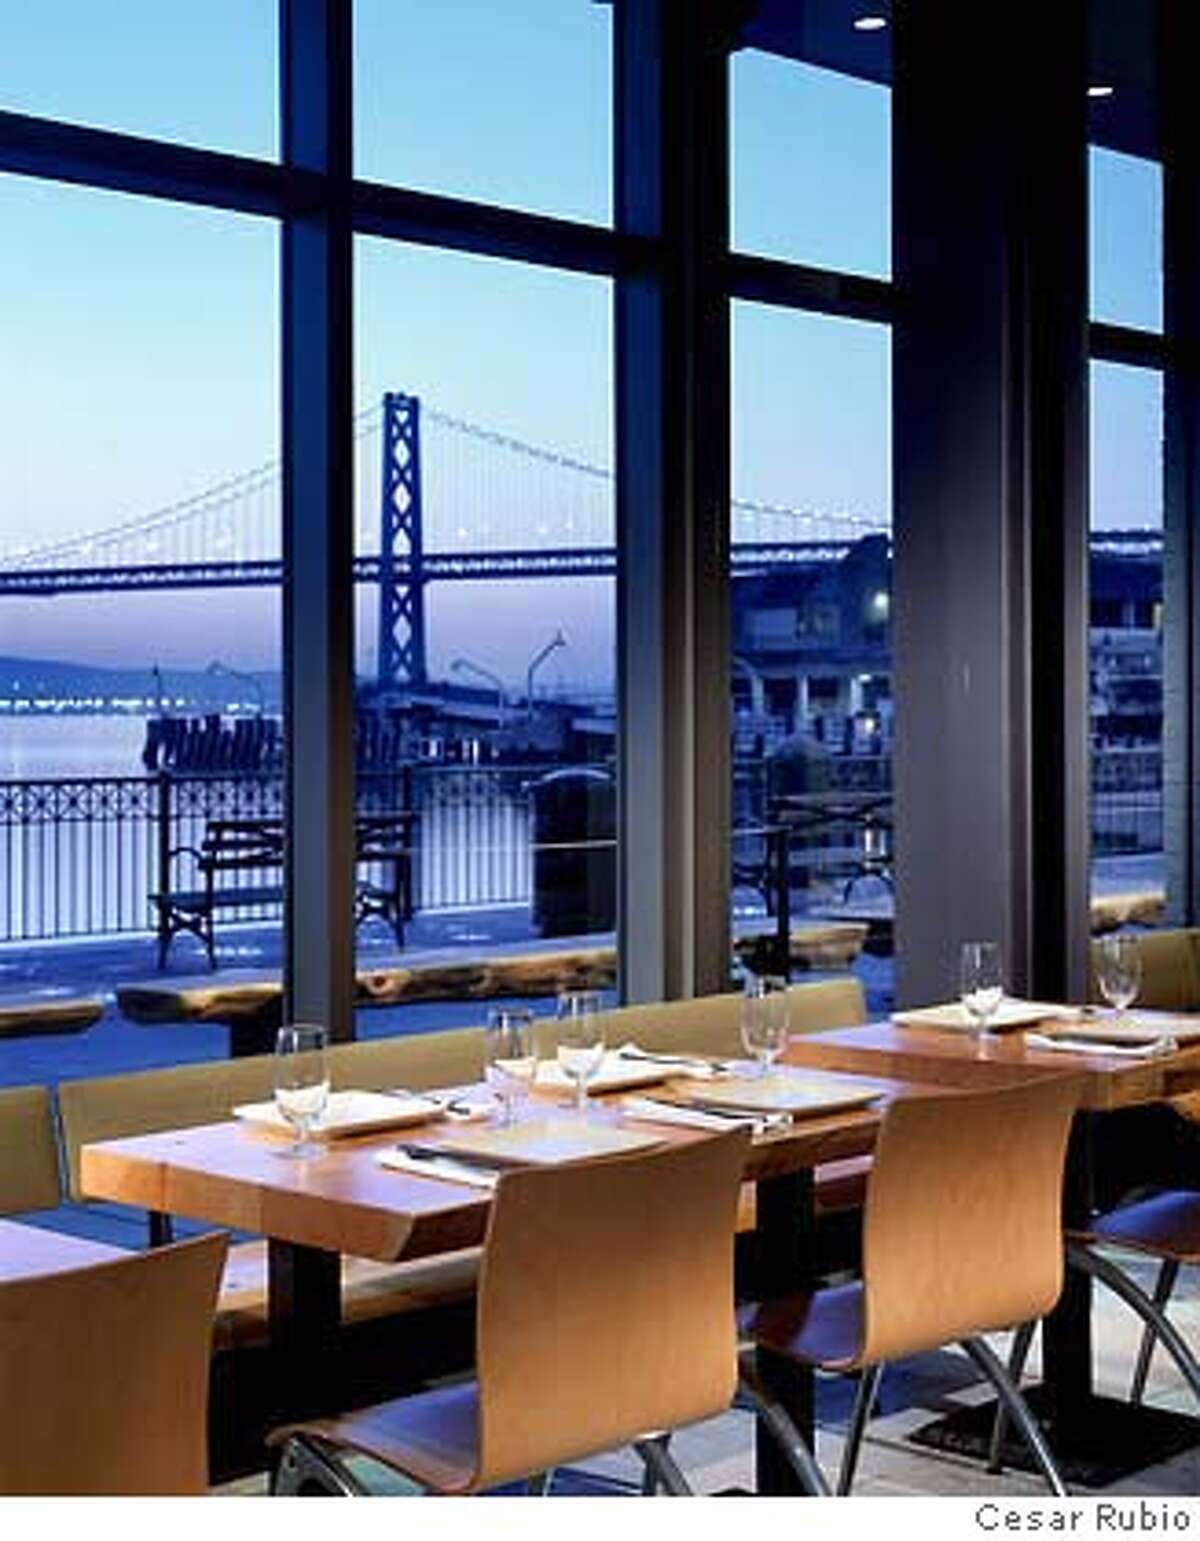 From inside, nearly every table has a view of the bay, boats or the bridge. Photo by Cesar Rubio